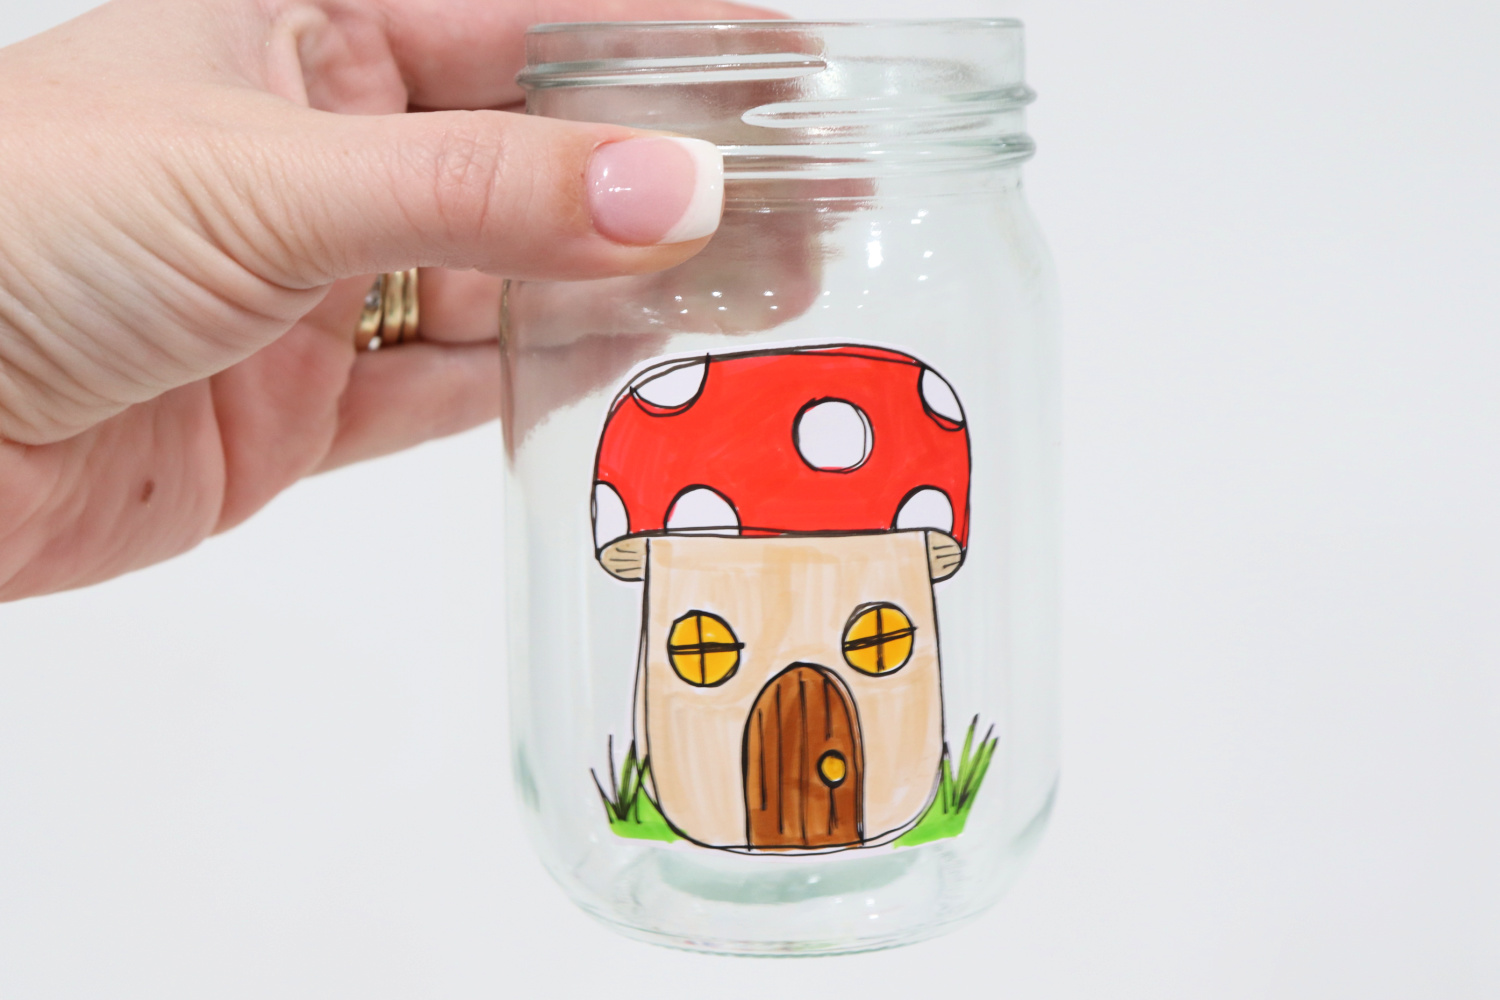 Image contains Amy’s hand holding a mason jar with a toadstool house sticker applied to the front center area.